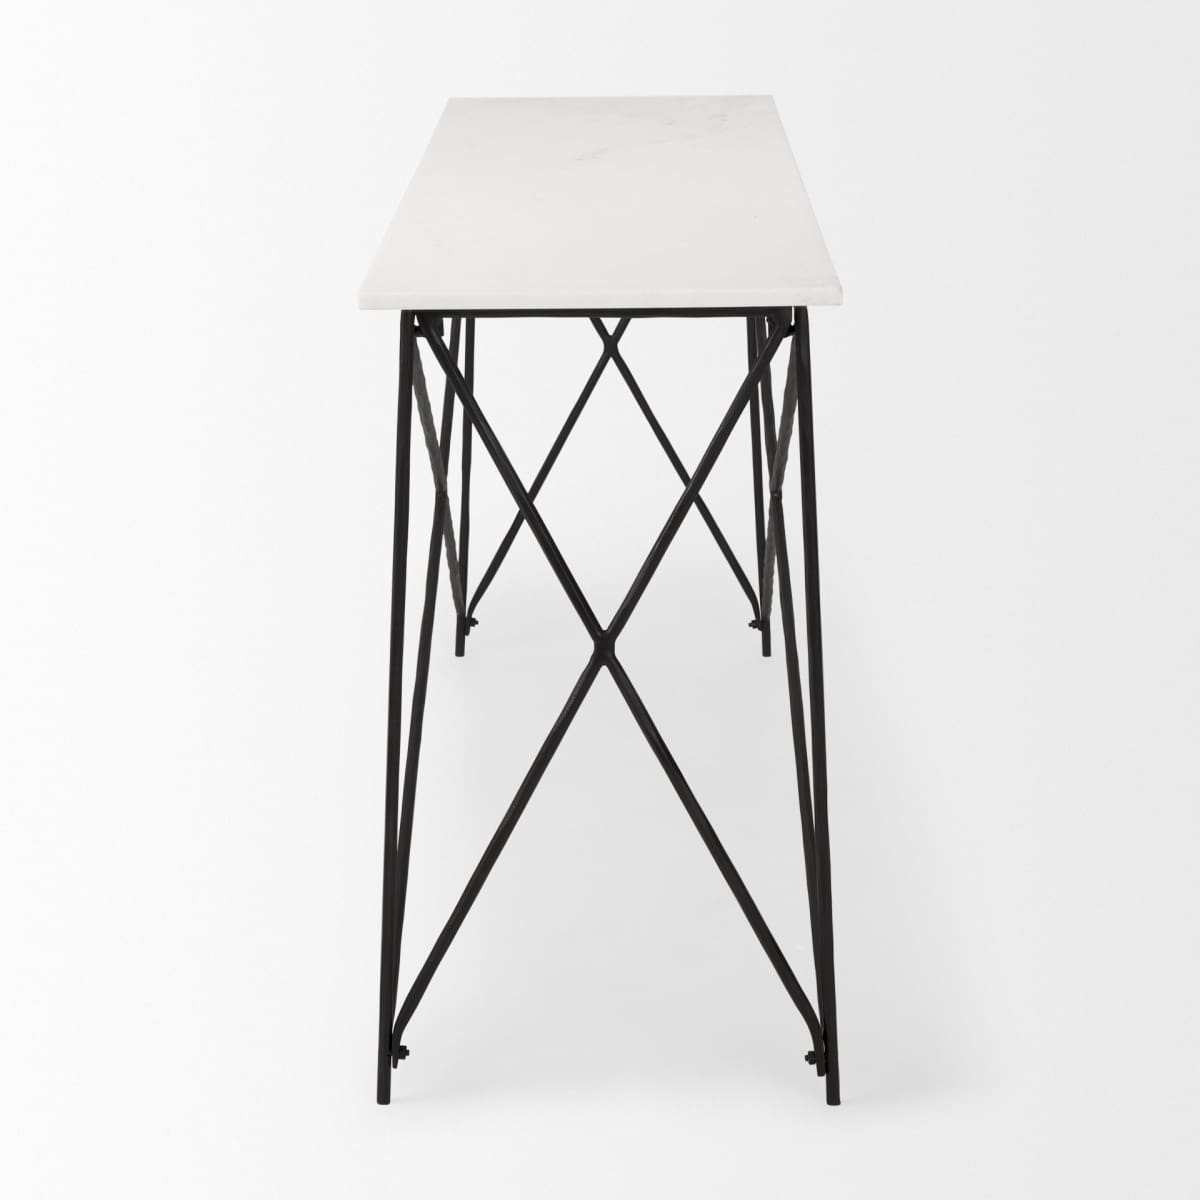 Lorlei Console Table White Marble | Black Iron - console-tables